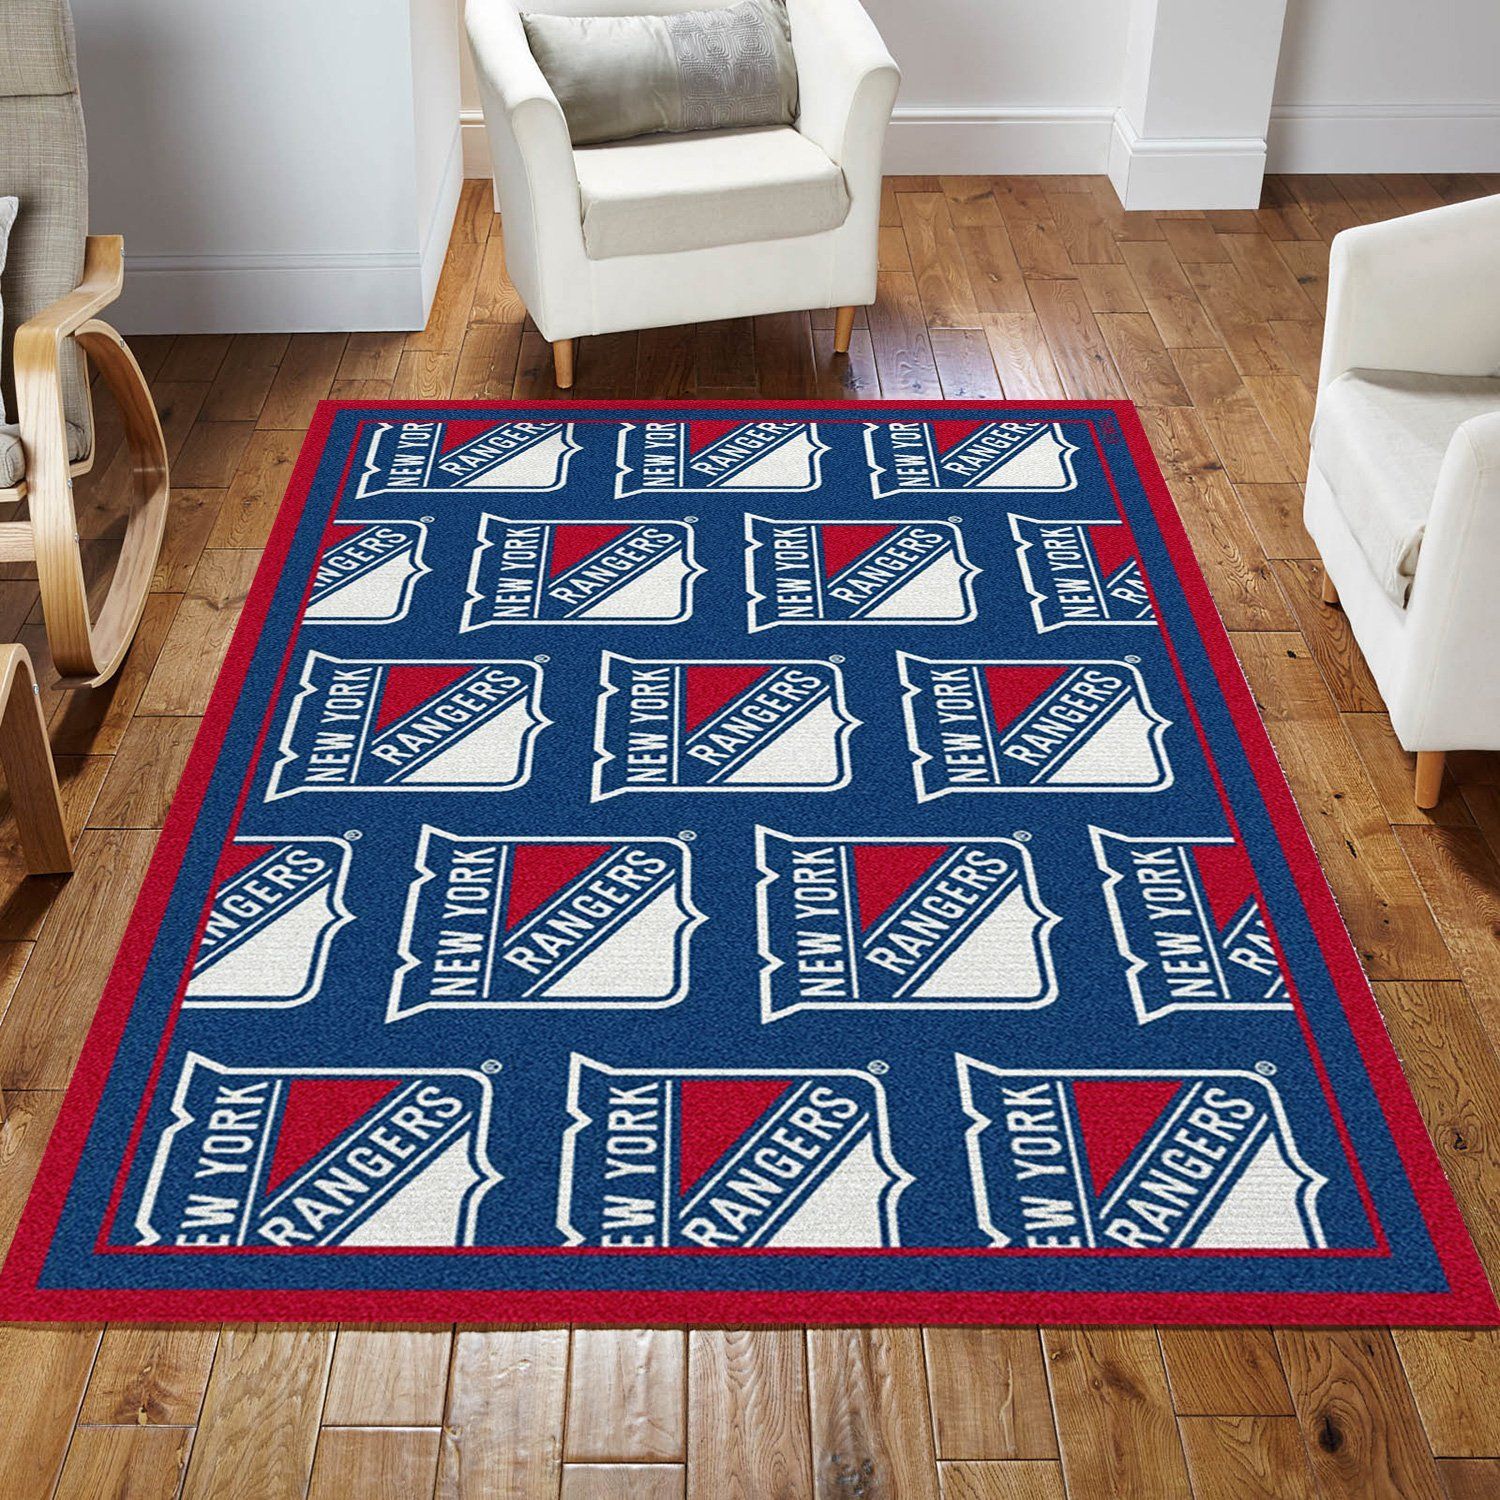 Nhl Repeat New York Rangers Area Rug, Living Room Rug, Home US Decor - Indoor Outdoor Rugs 3